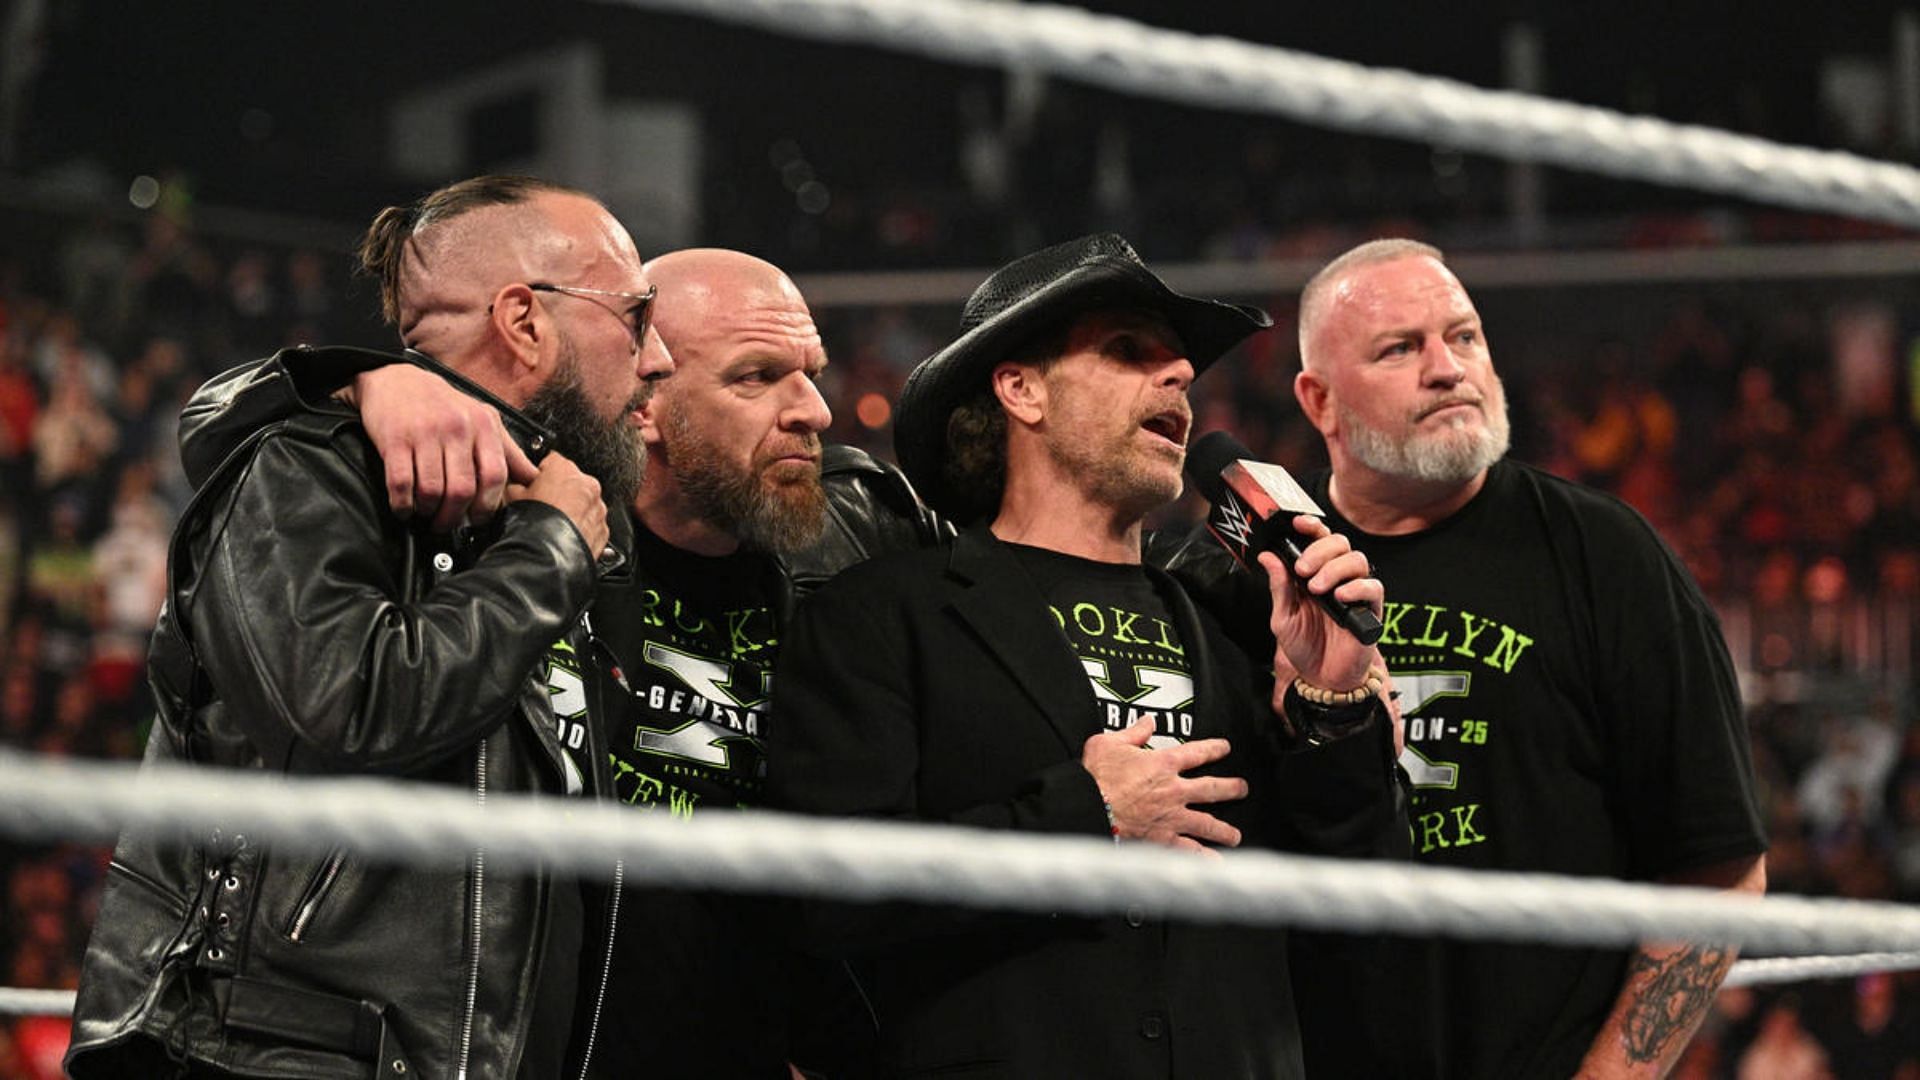 DX are one of the most iconic WWE factions of all time